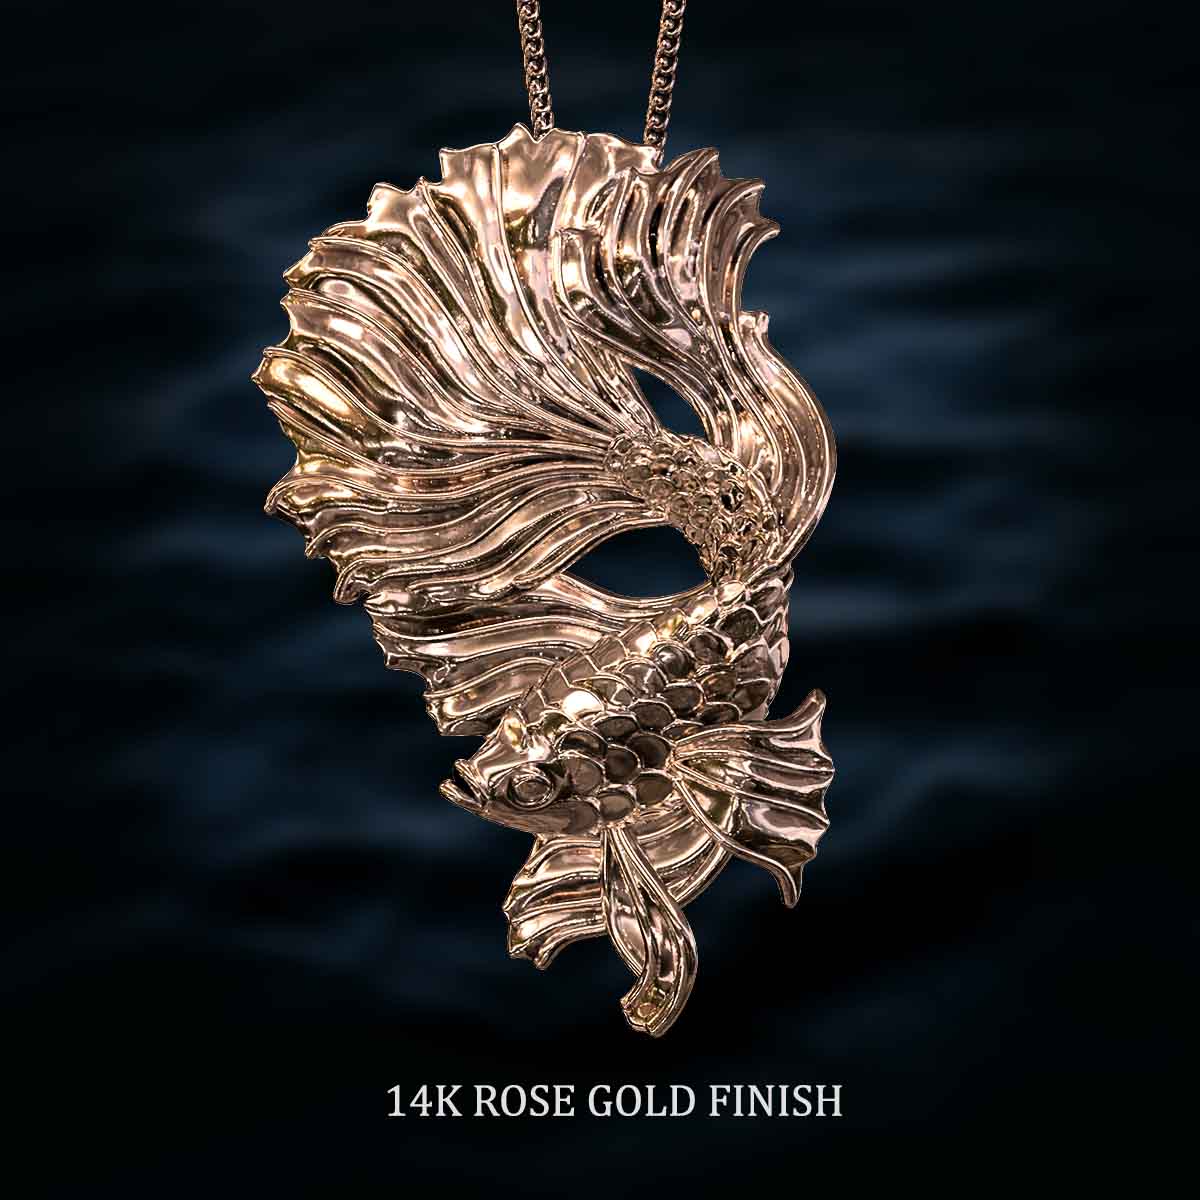     14k-Rose-Gold-Finish-Betta-Fish-Pendant-Jewelry-For-Necklace